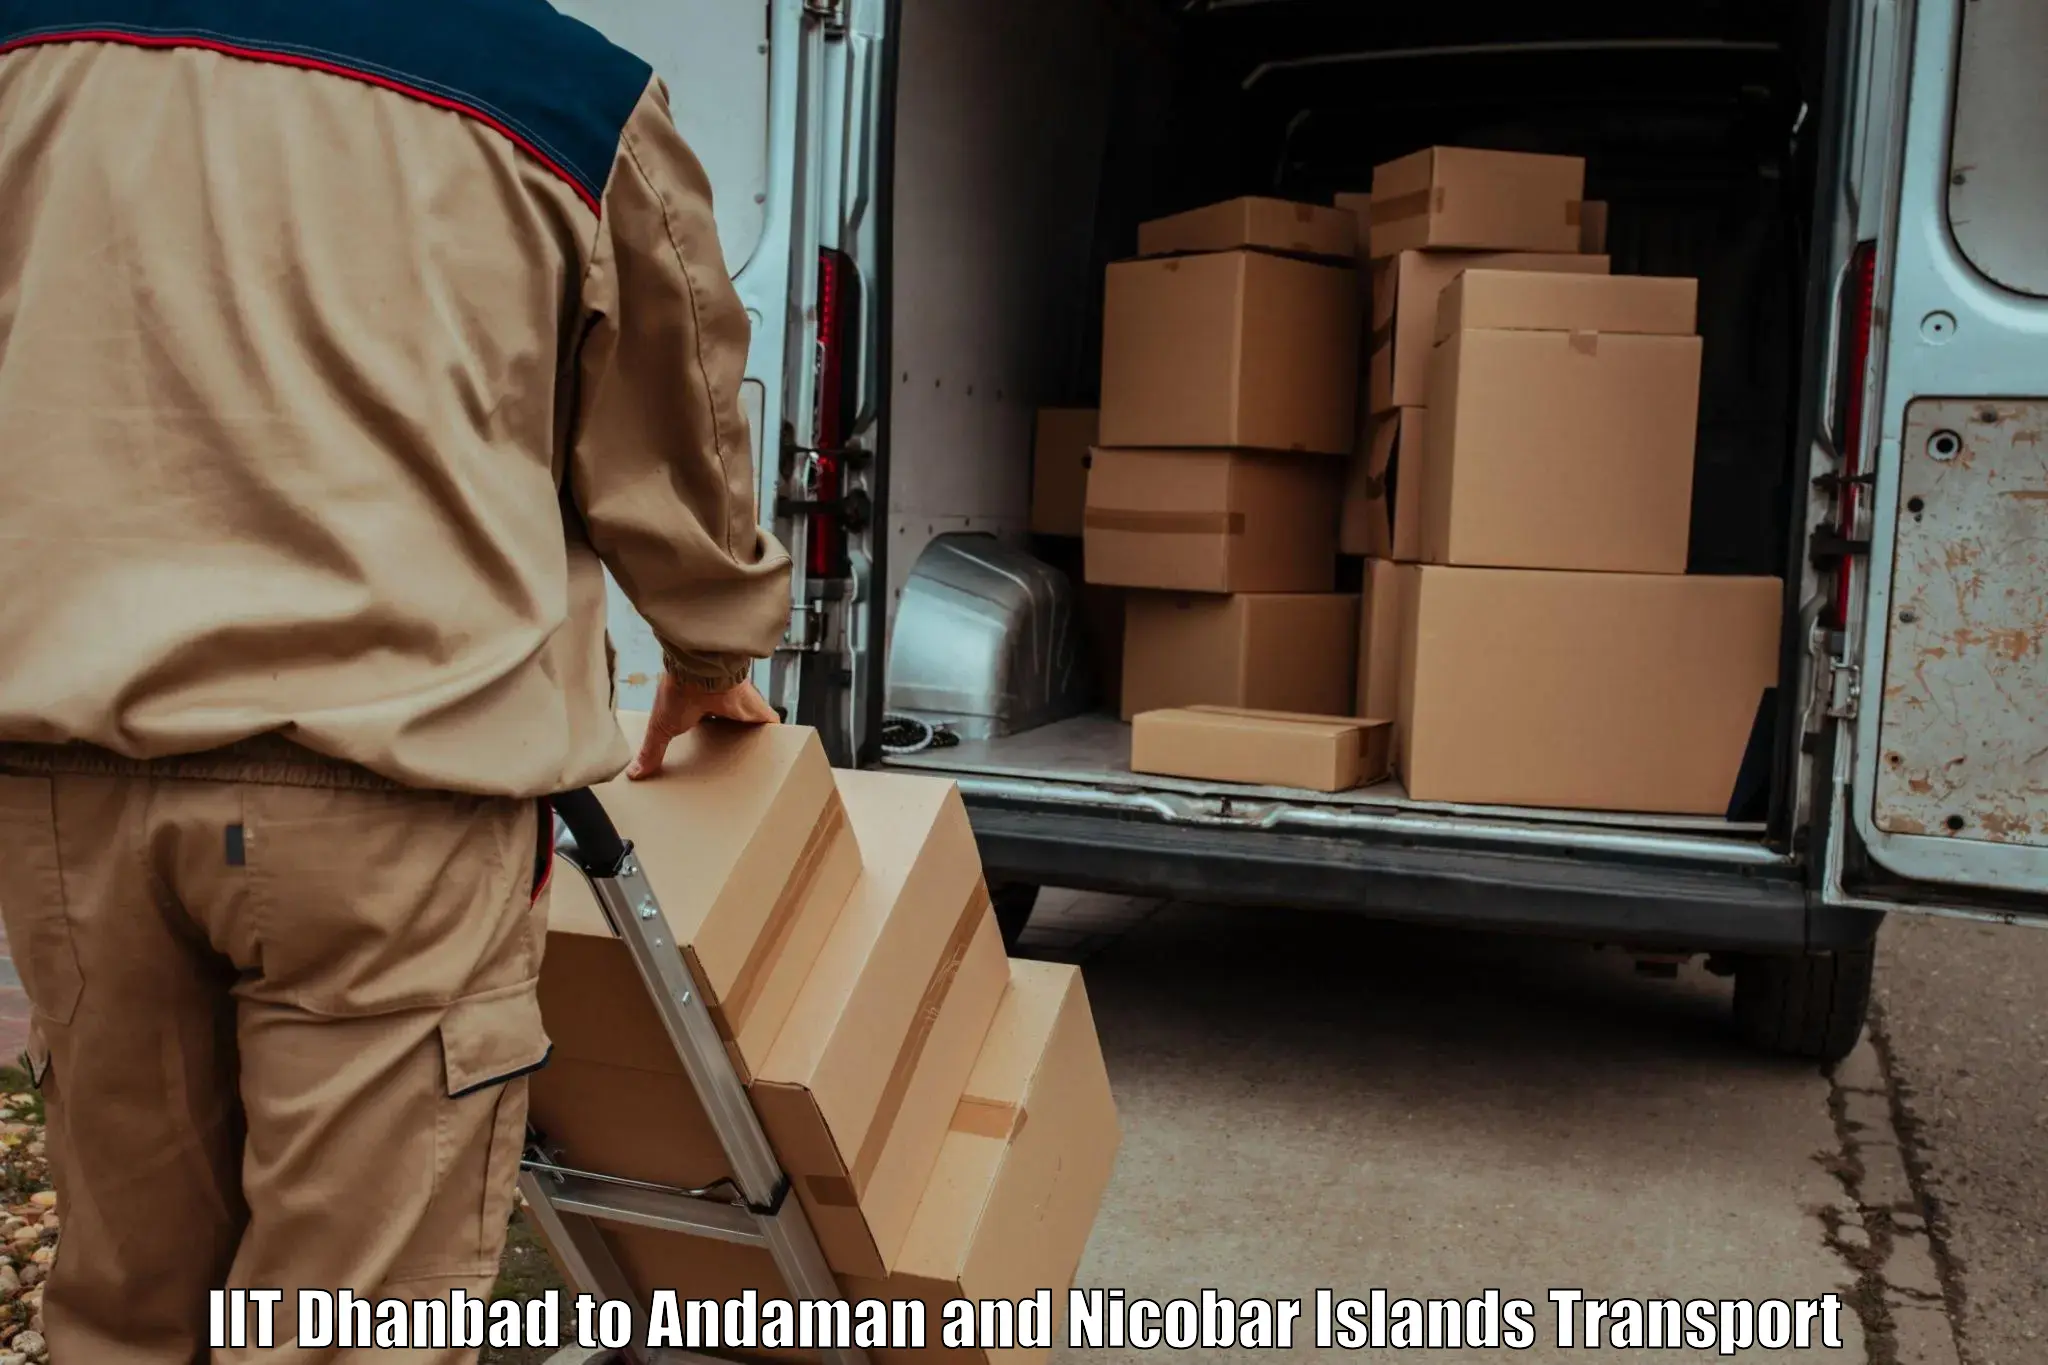 Air freight transport services IIT Dhanbad to Andaman and Nicobar Islands